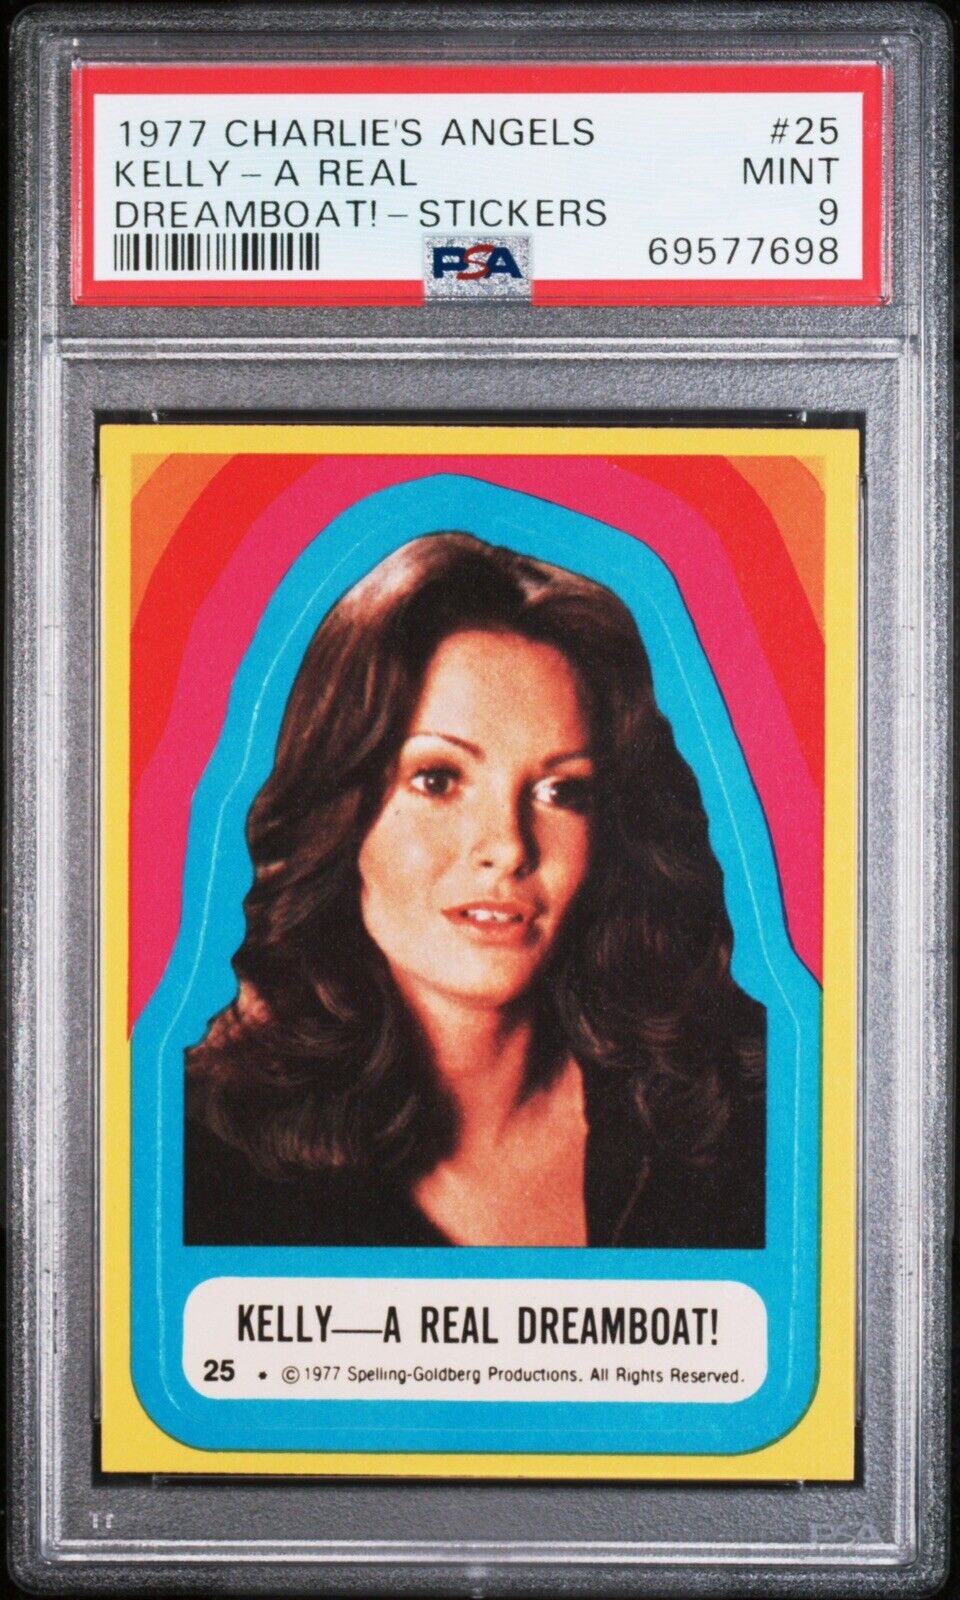 1977 CHARLES ANGELS #25 KELLY - A REAL DREAMBOAT - STICKERS PSA 9 MINT